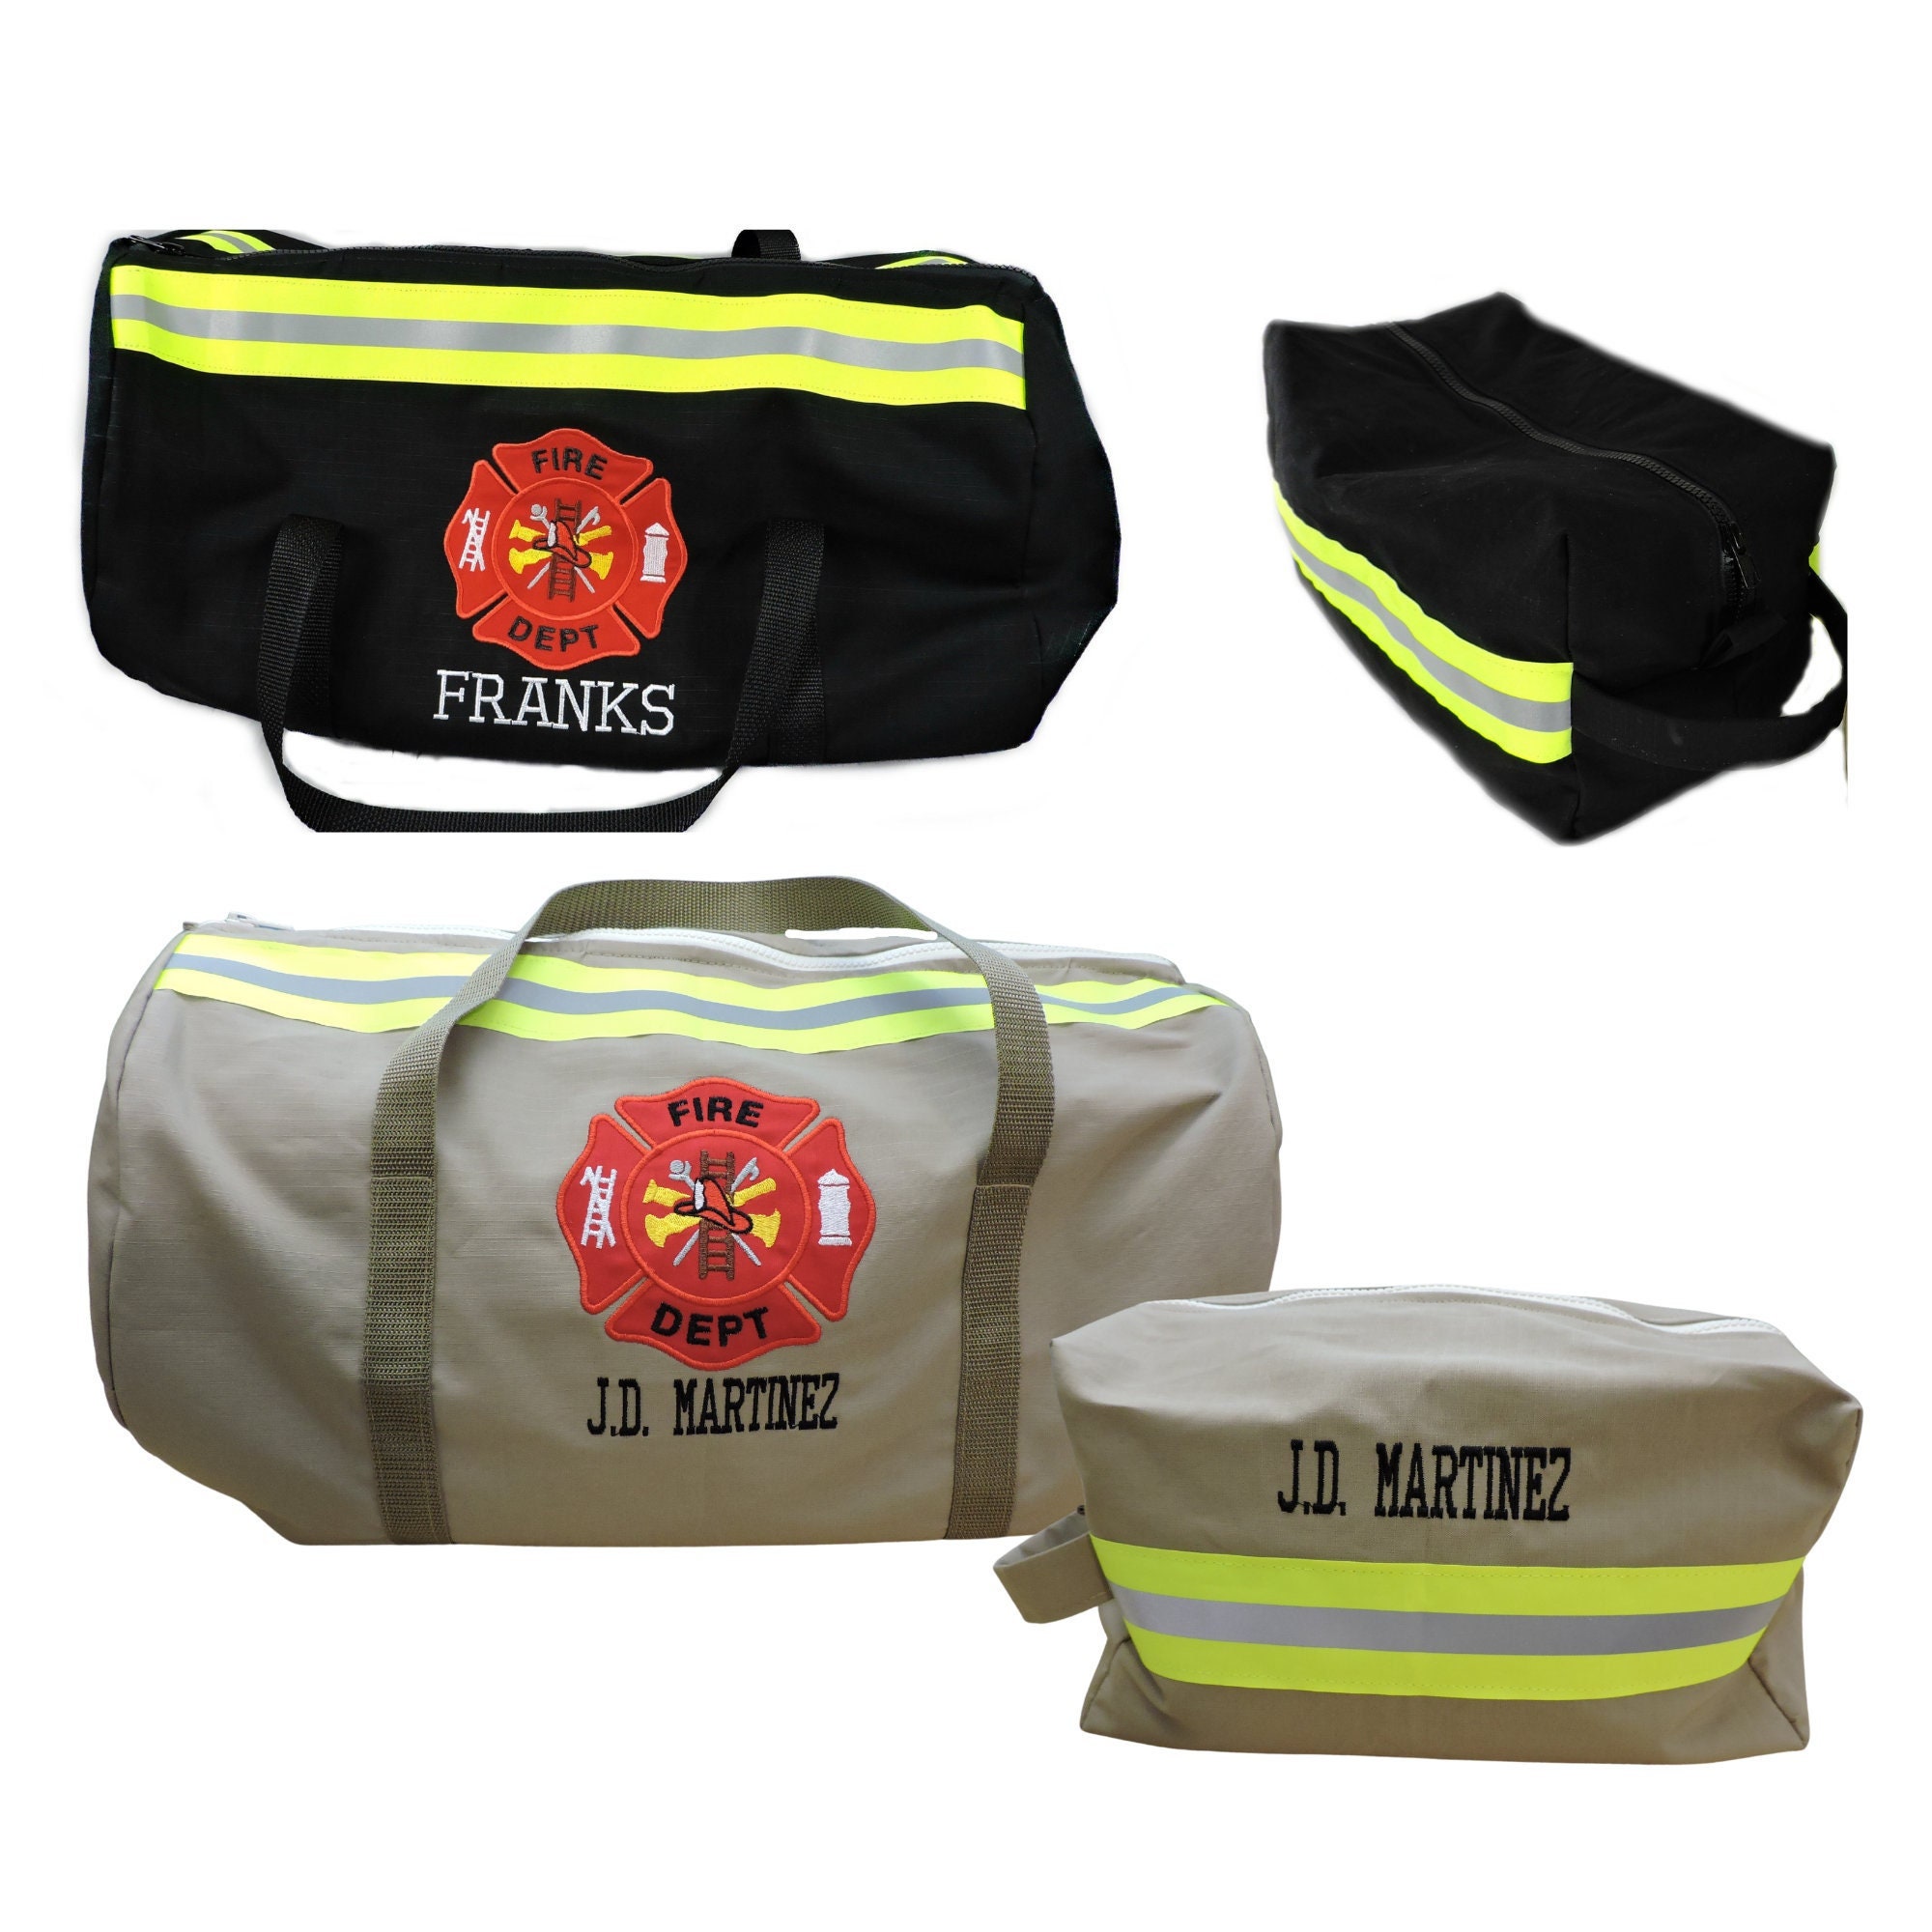 Premium 3XL firefighter rescue step-in turnout gear bag